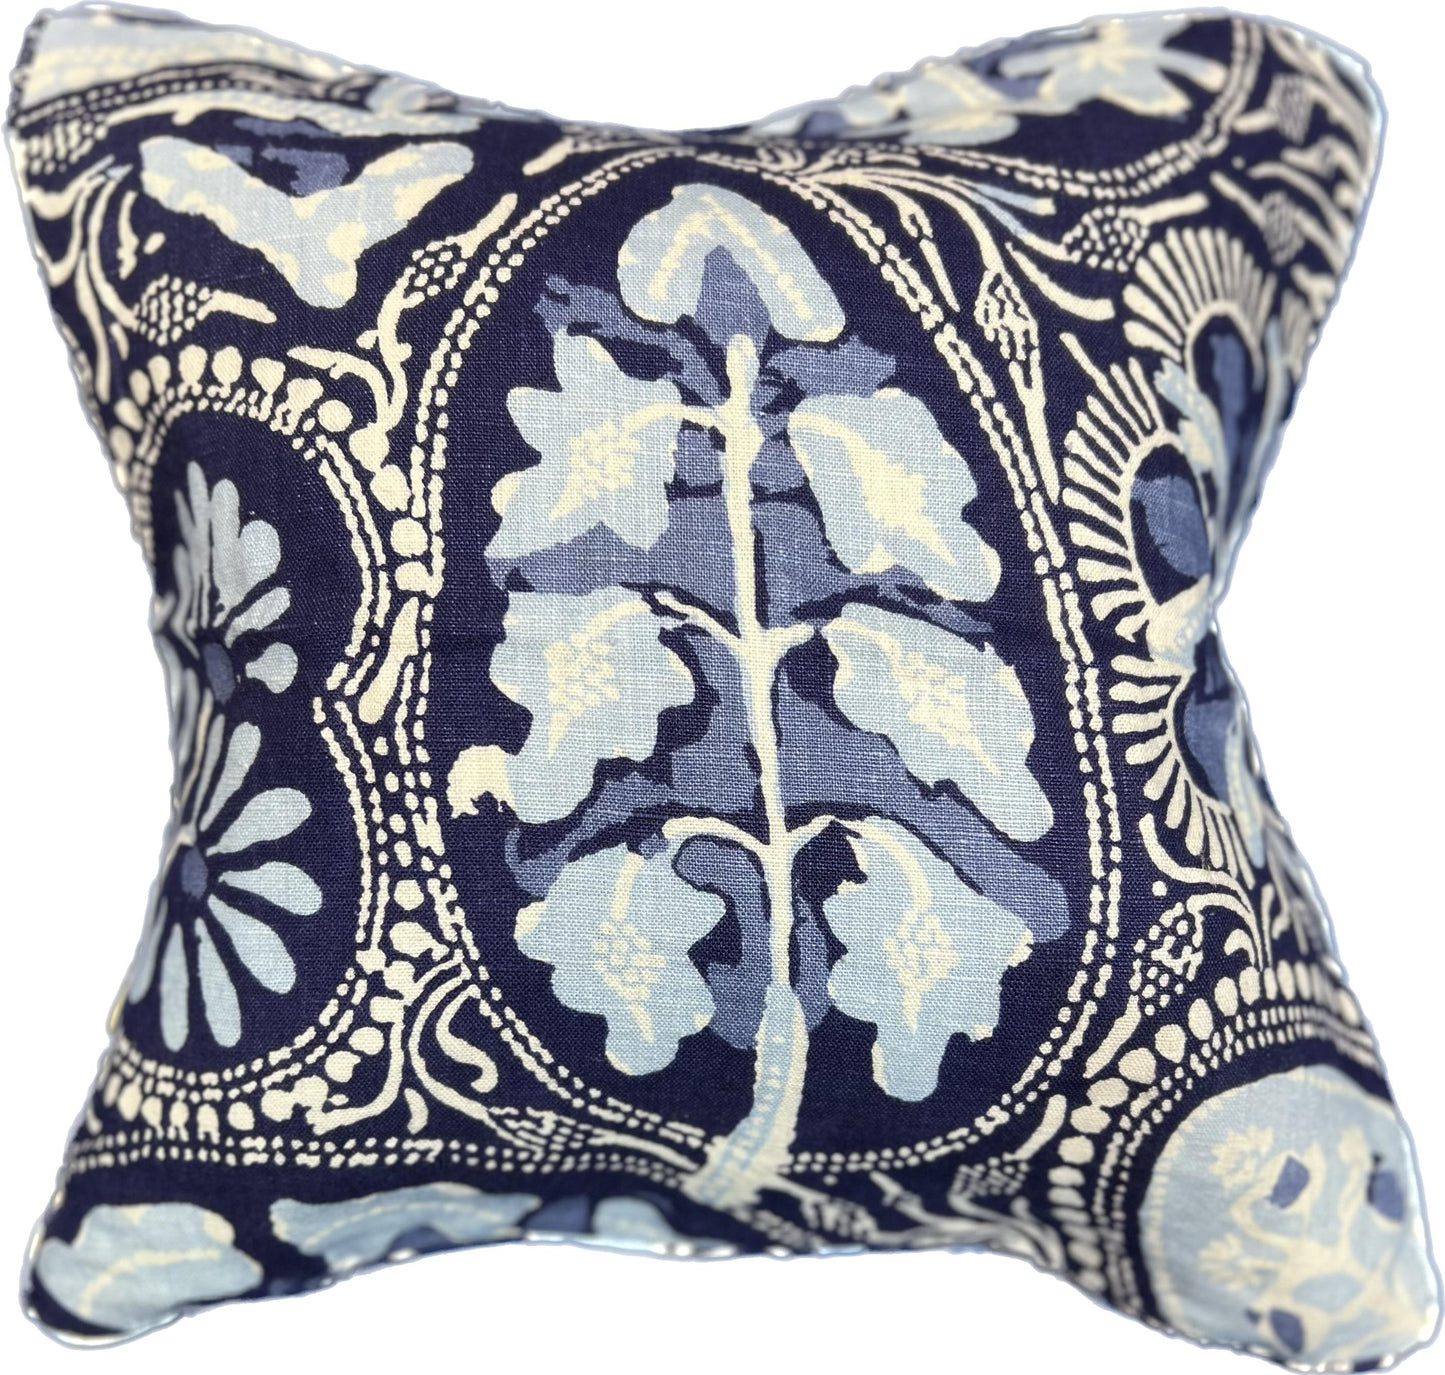 16"x16" Large Motif Pillow Cover (two sided)